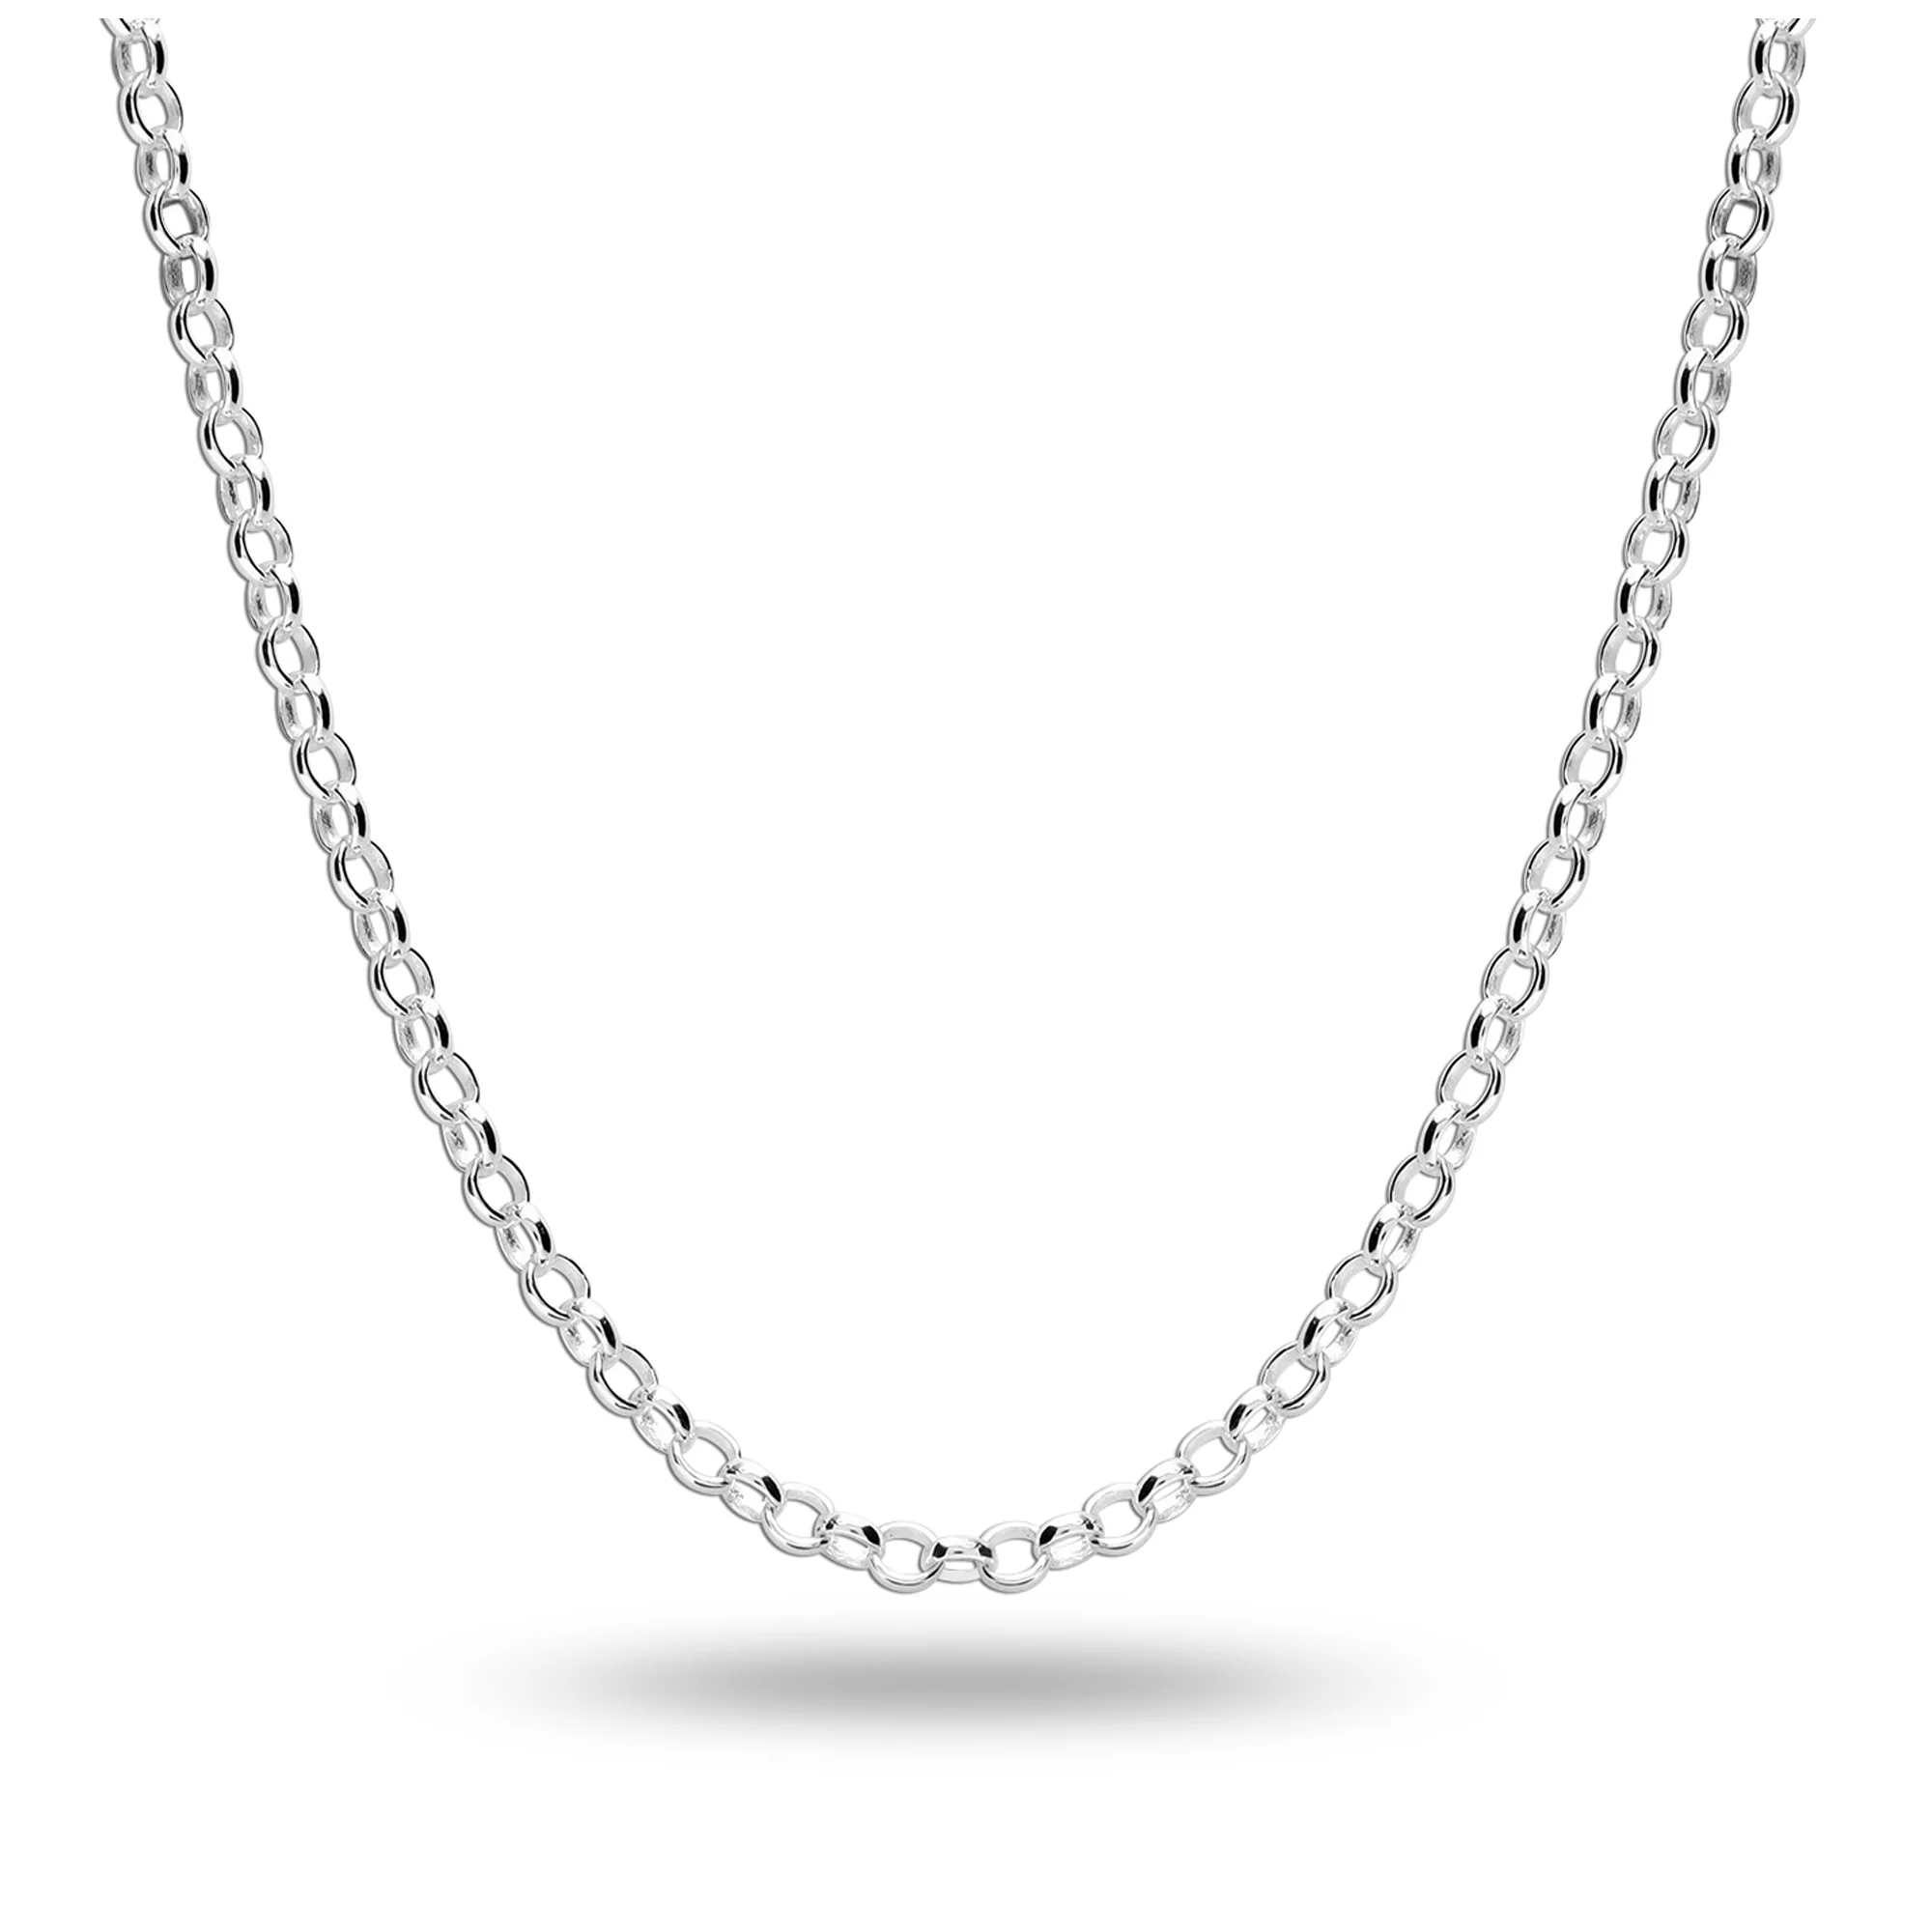 Large Belcher Chain with Dog Clip Clasp – Ashley Zhang Jewelry